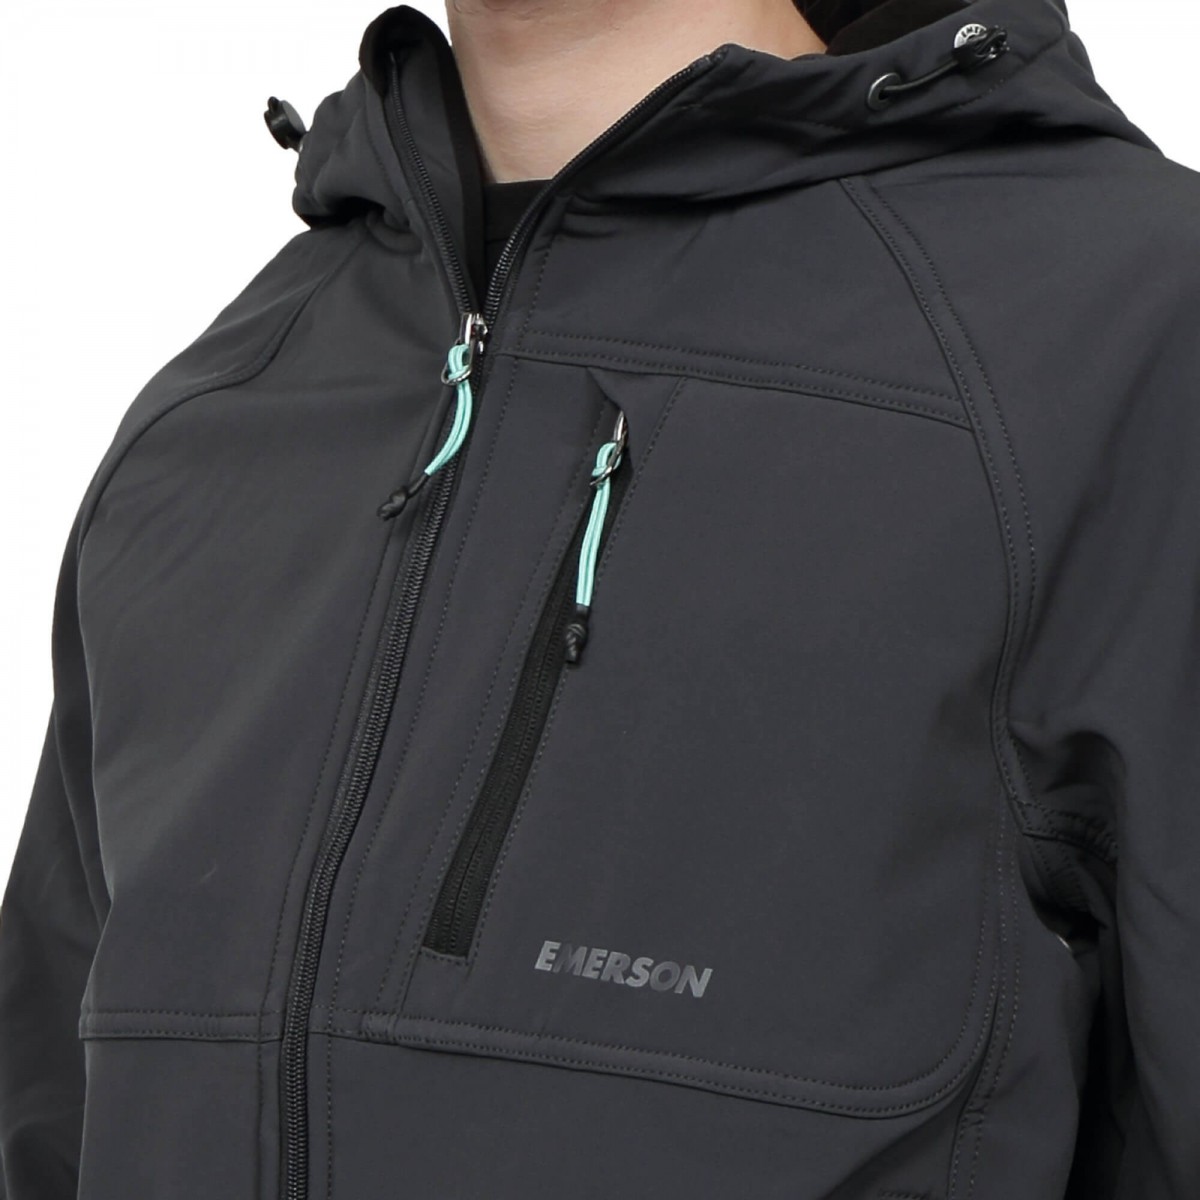 SOFT SHELL RIBBED JACKET WITH HOOD